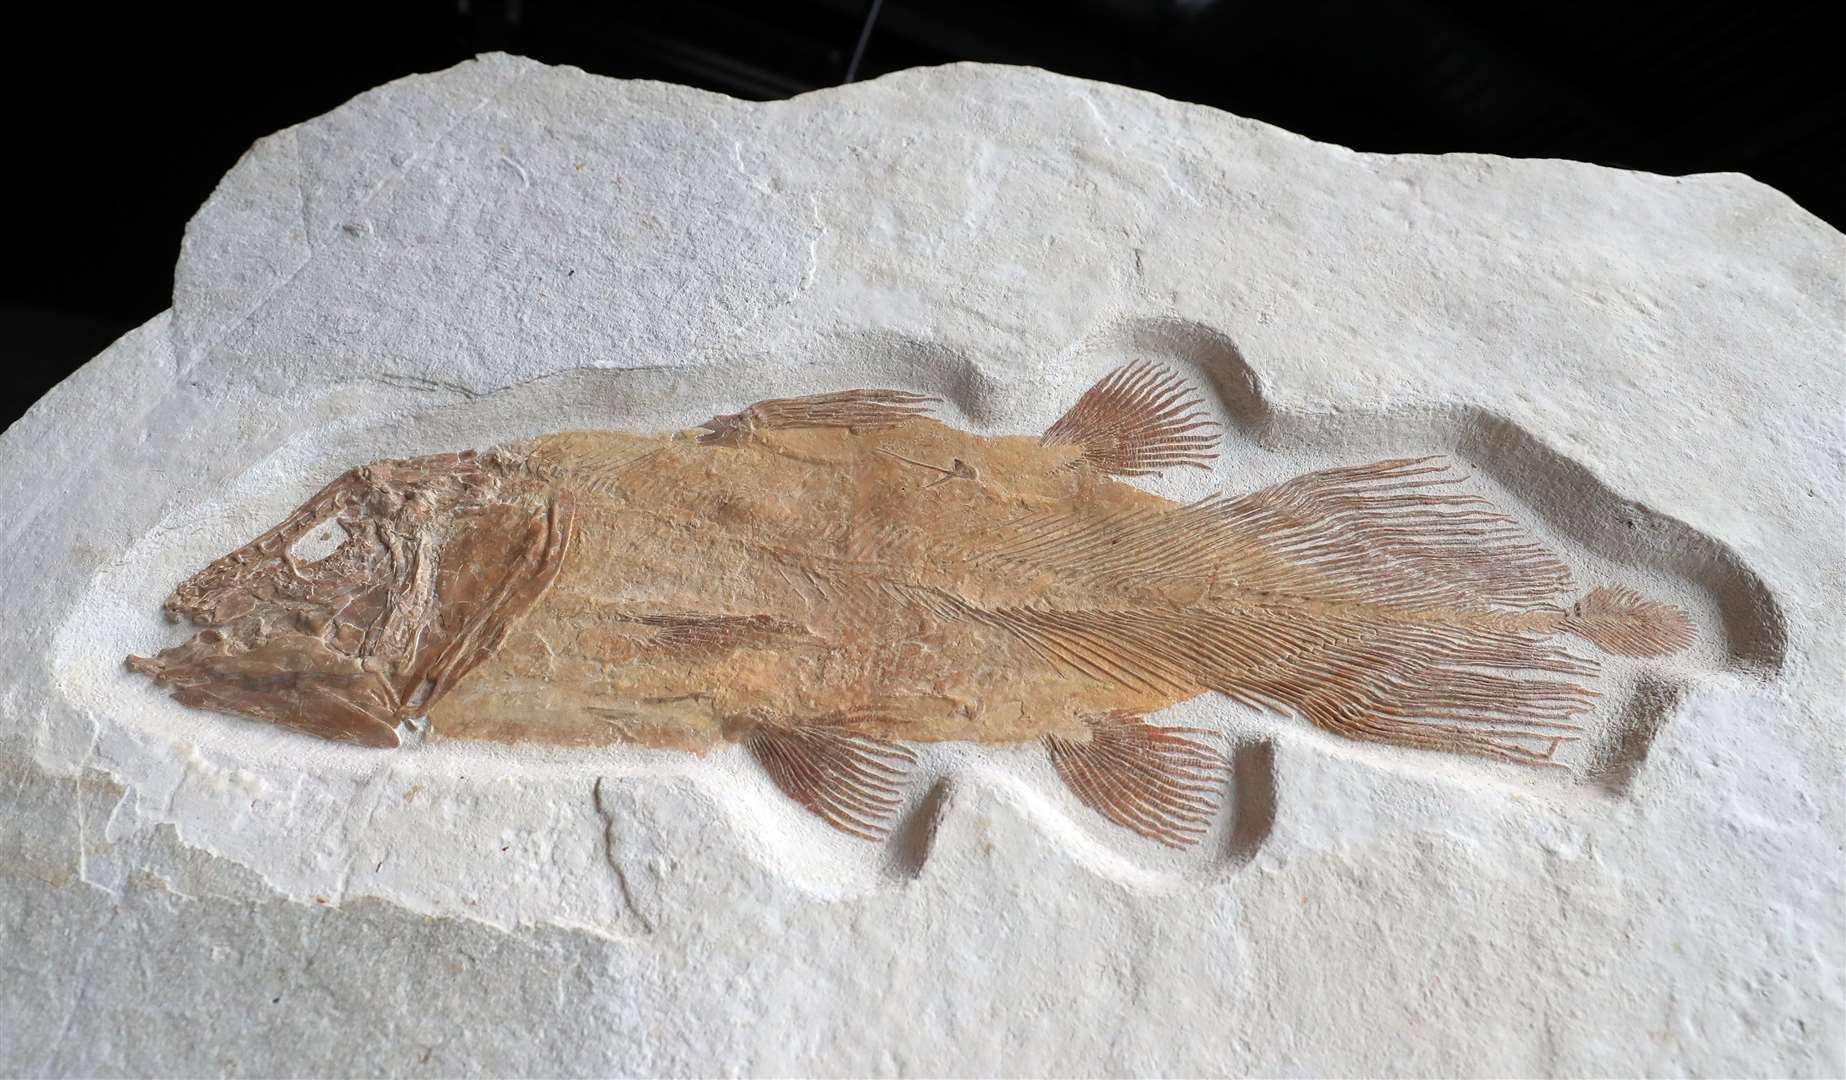 The very rare coelacanth fossil is expected to sell for between £30,000 and £50,000 (Gareth Fuller/PA)